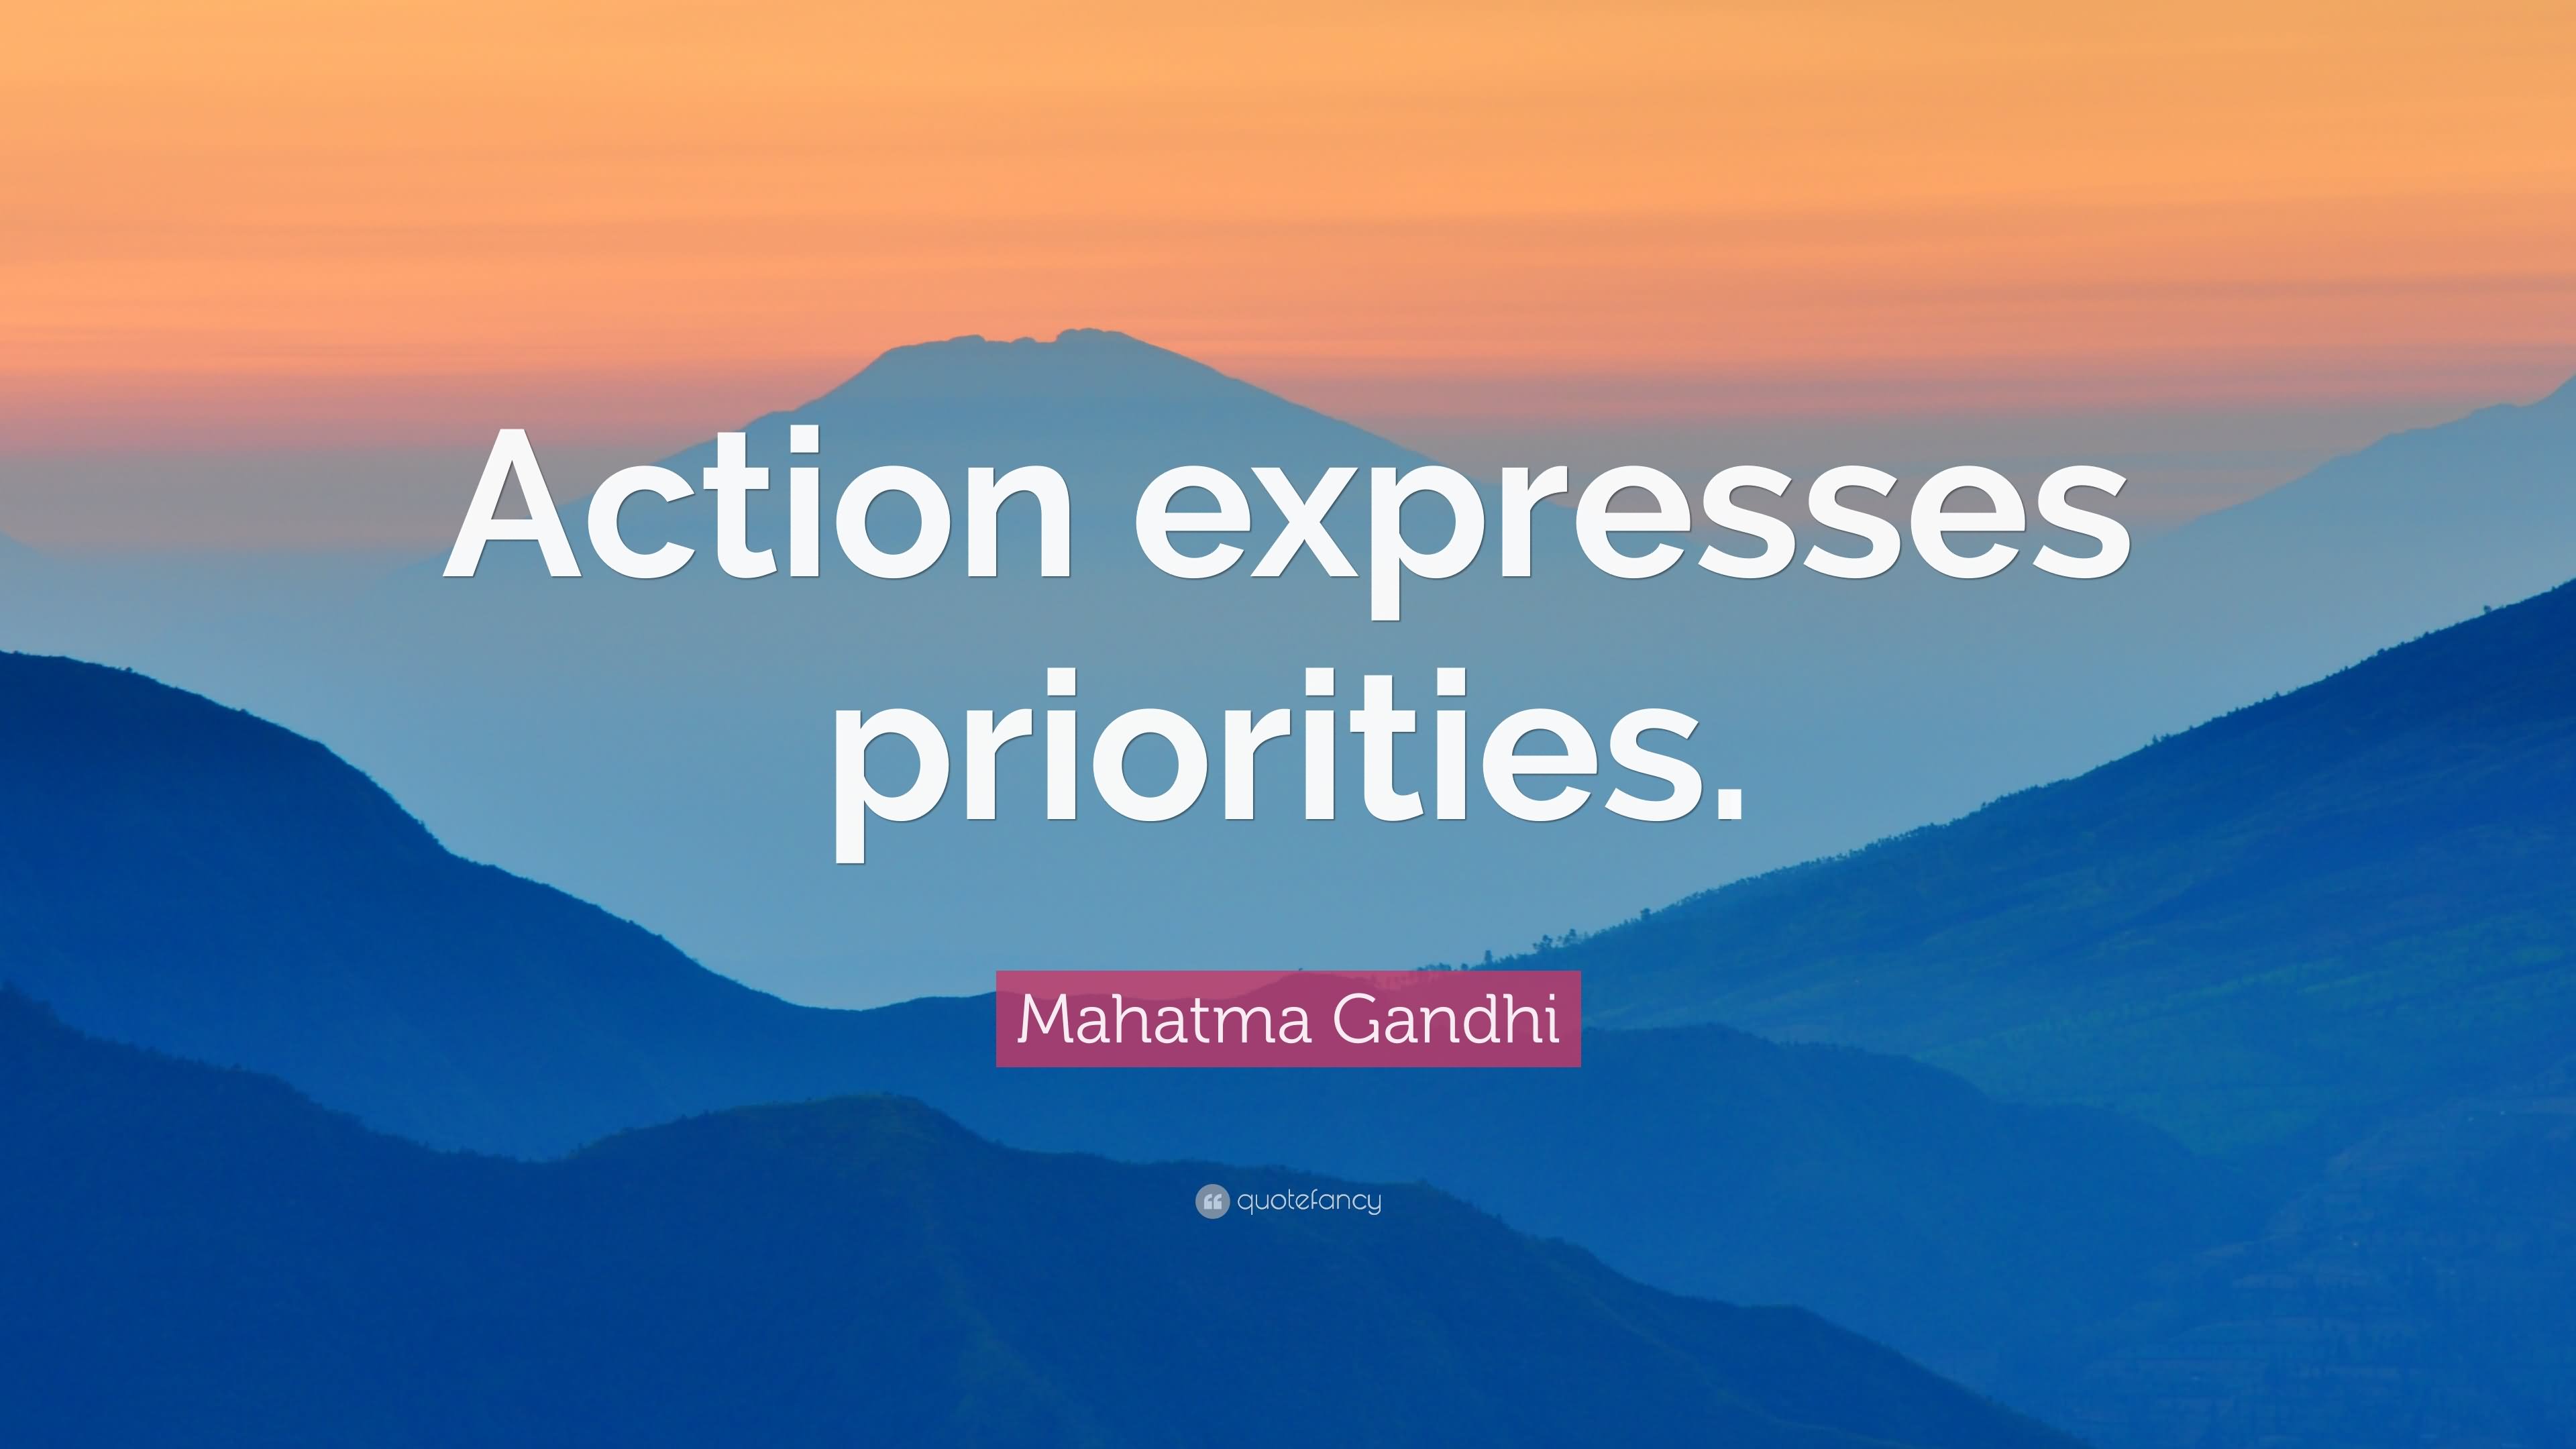 Action expresses priorities (25)